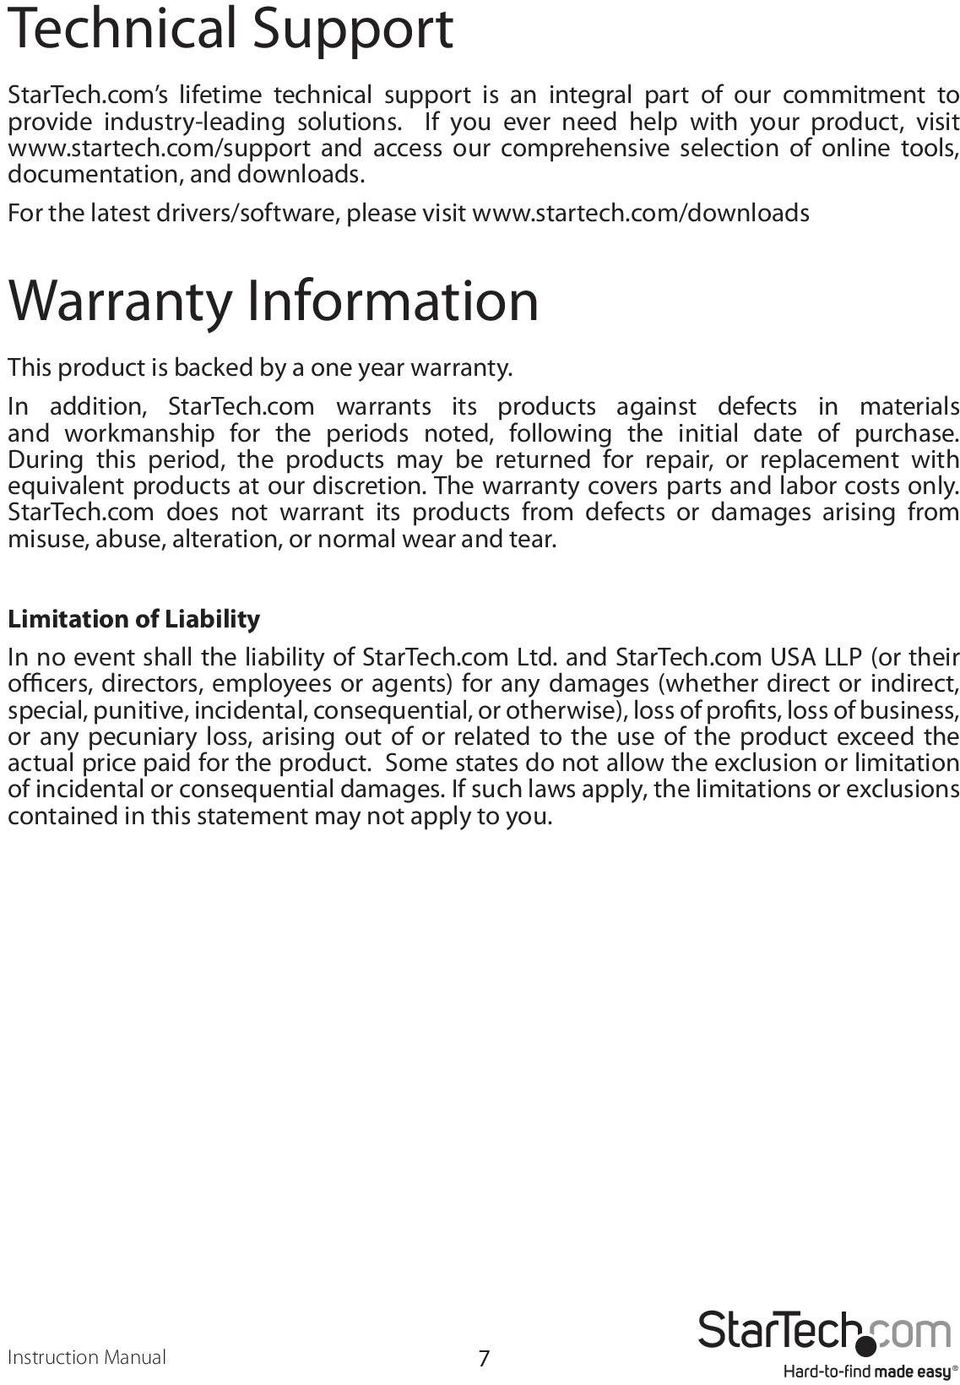 com/downloads Warranty Information This product is backed by a one year warranty. In addition, StarTech.